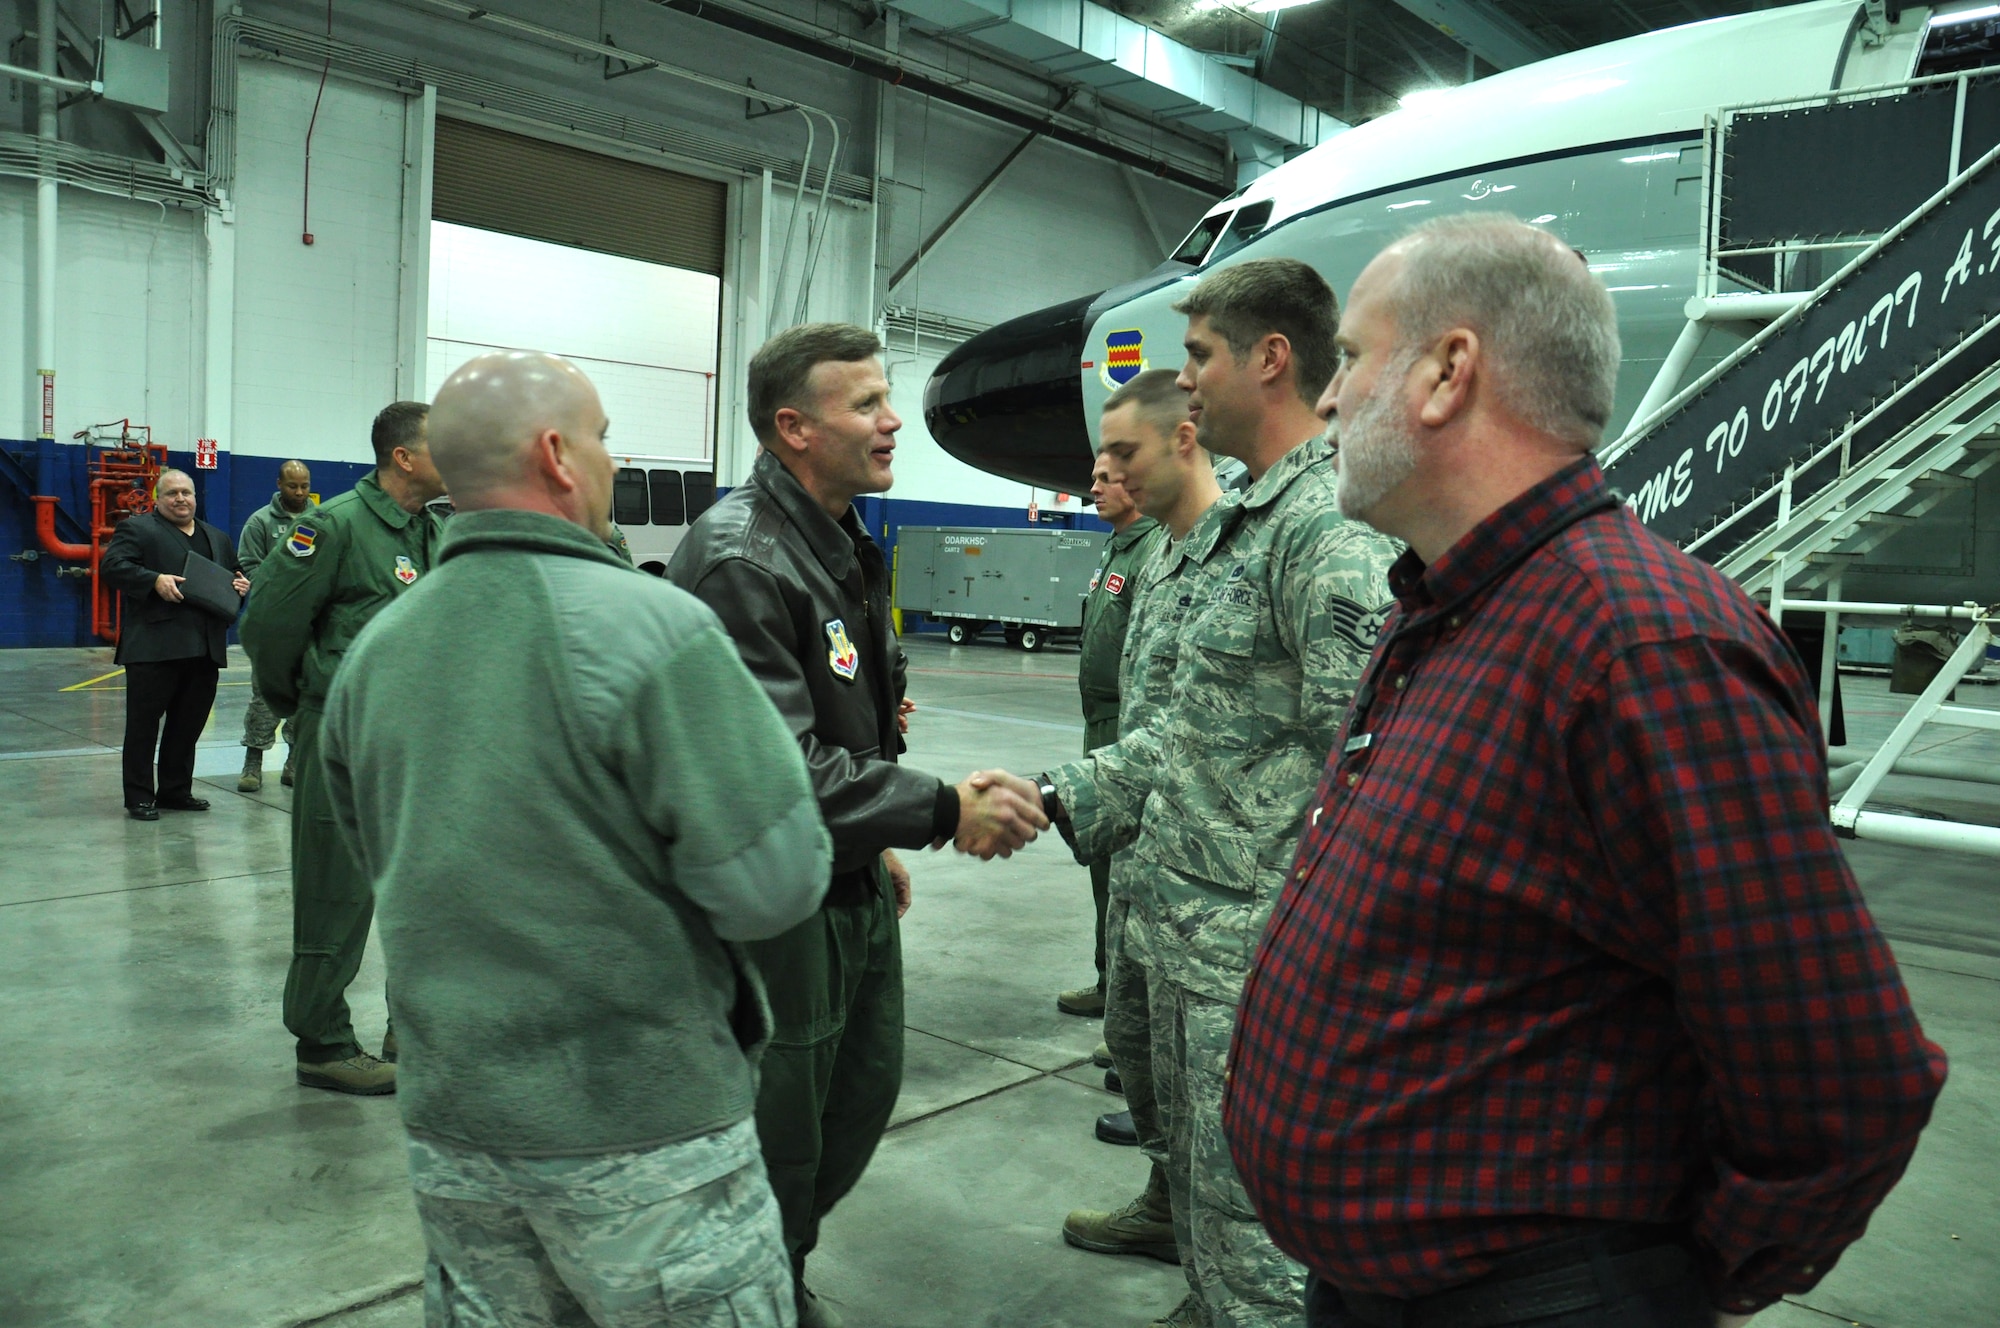 U.S. Air Force Lt. Gen. Tod Wolters, 12th Air Force (AFSOUTH) commander, shakes hands with U.S. Air Force Staff Sgt. Adam Bowers, 55th Aircraft Maintenance Squadron and Rivet Joint crew chief, before receiving a tour of the jet on Jan. 8 at the Bennie Davis Maintenance Facility on Offutt Air Force Base, Neb. This is Wolters' first visit to Offutt after taking command of the 12th Air Force in September. (U.S. Air Force photo by 2nd Lt. Carly Costello/Released)